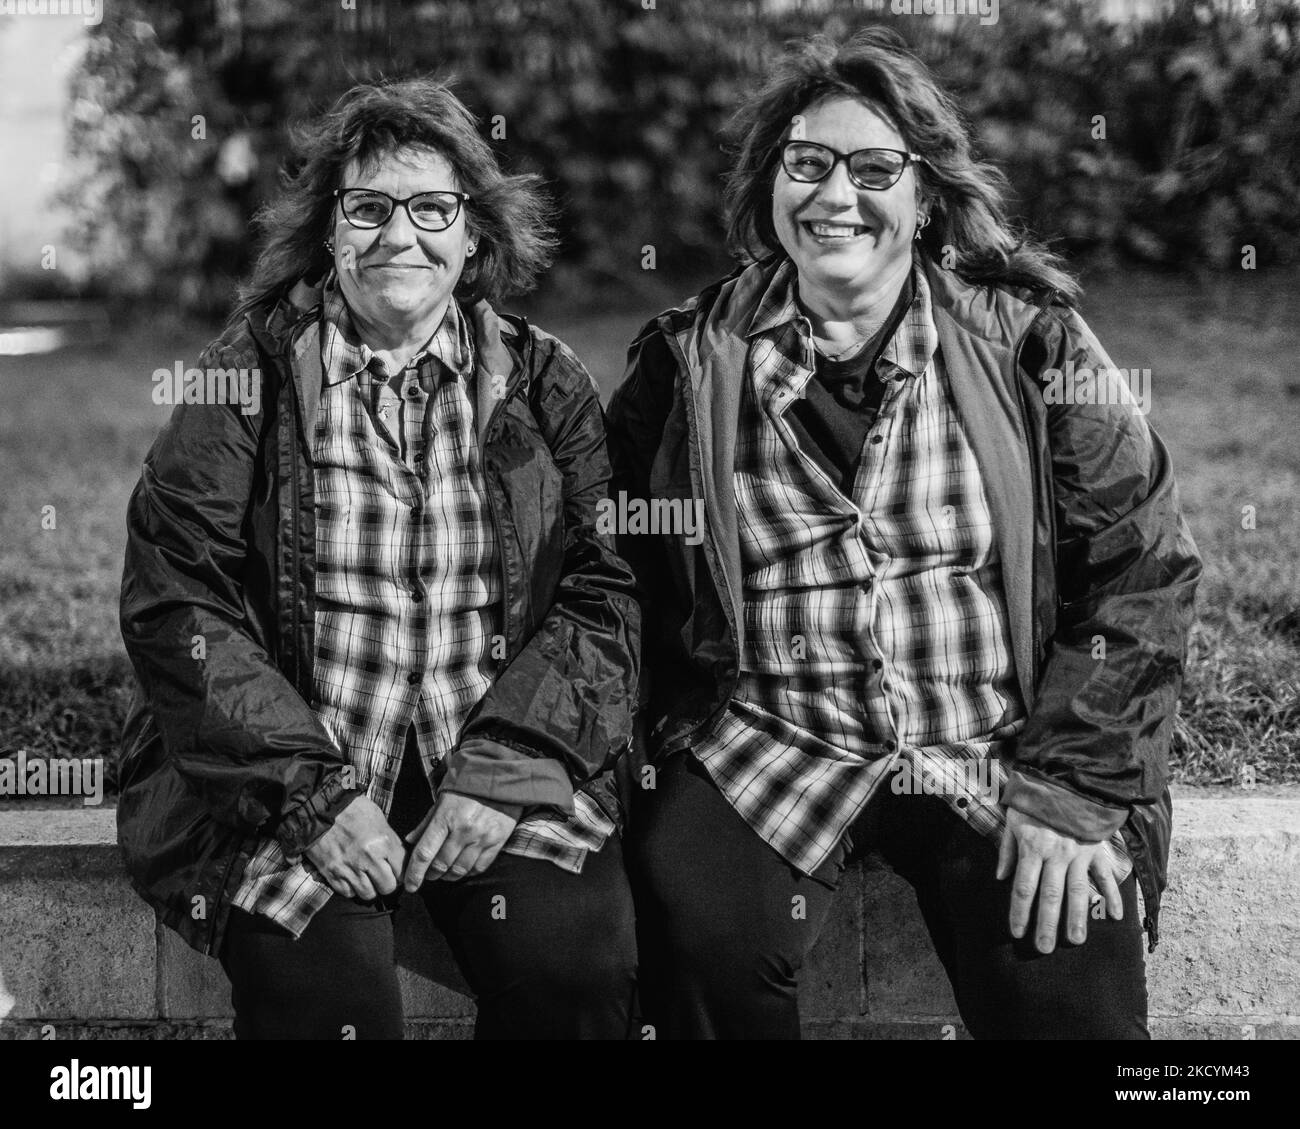 Black and white image of Spanish twins relaxing in London. Stock Photo